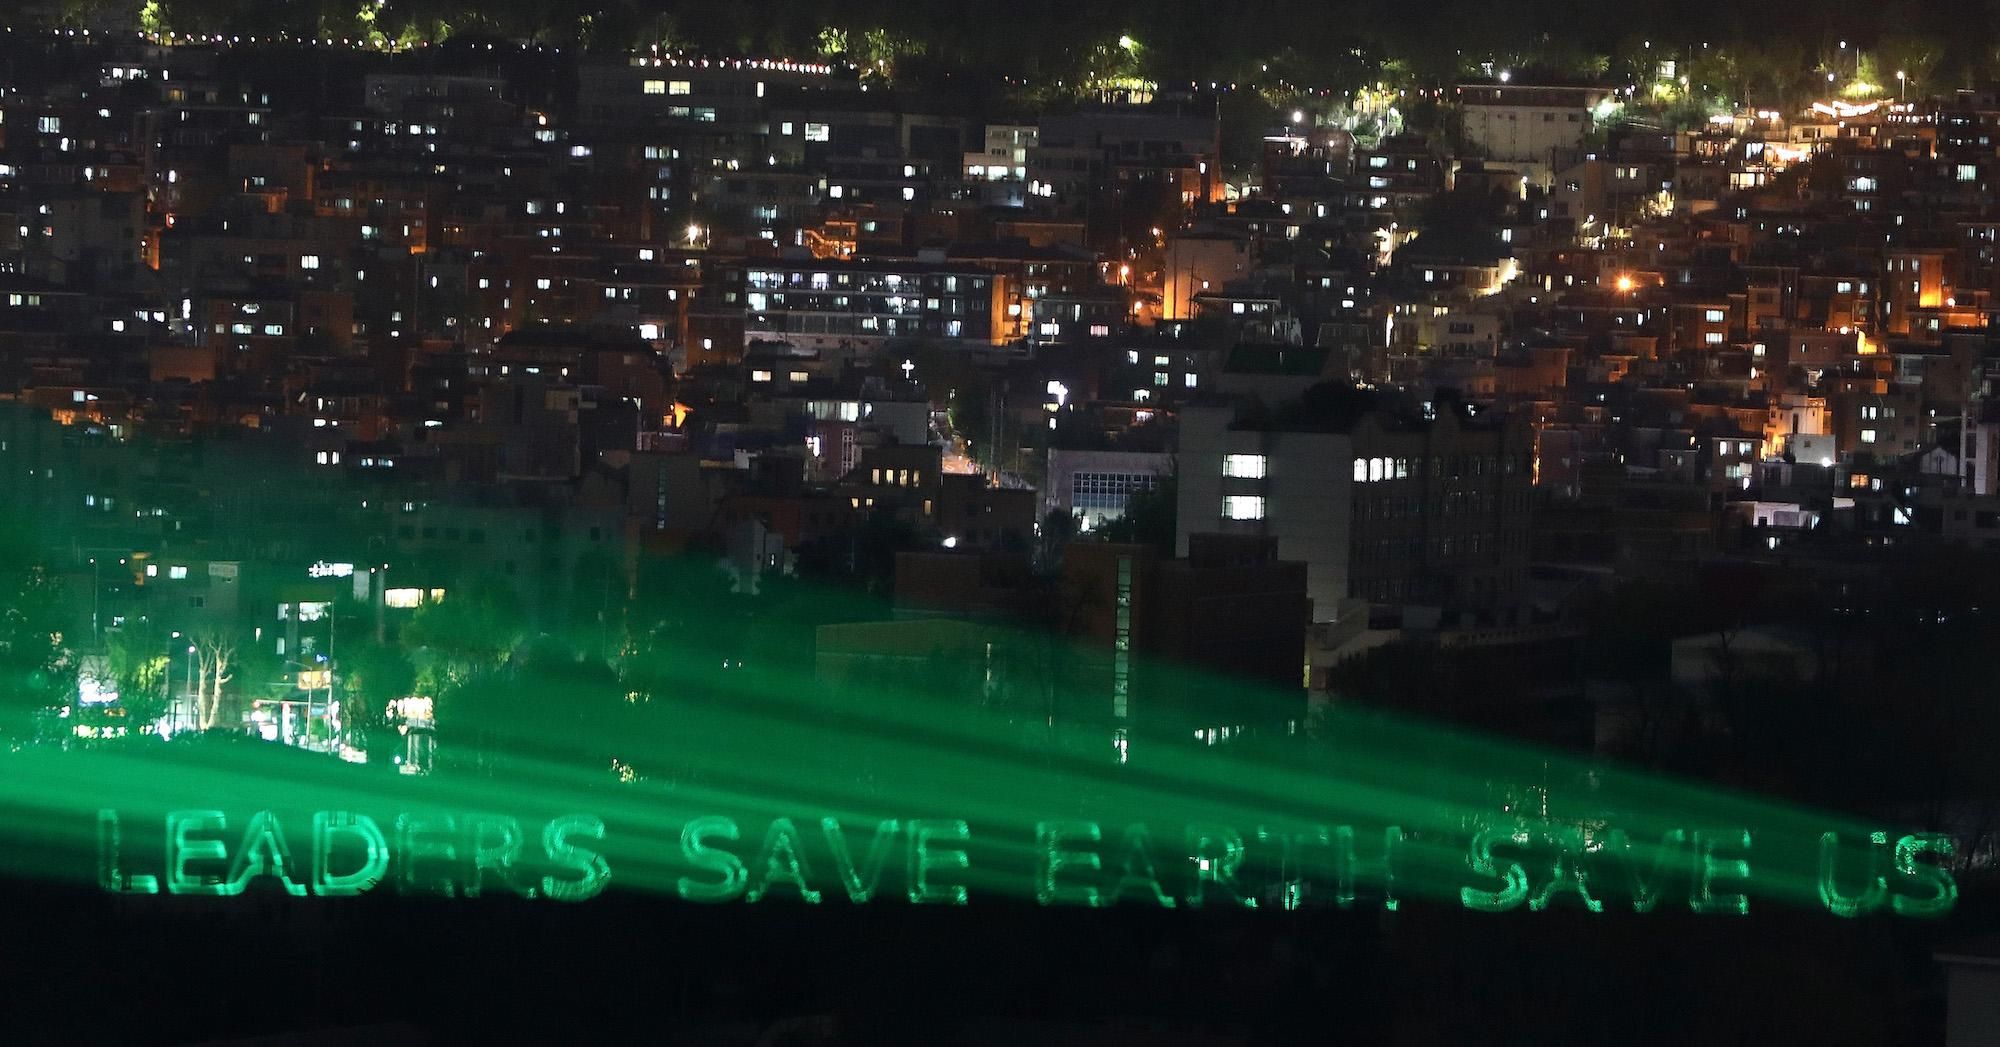 Greenpeace activists projected a message to world leaders to demanding urgent action to turn the tide on the worsening climate emergency on April 21, 2021 in Seoul, South Korea—the eve of U.S. President Joe Biden's Climate Leaders Summit. 